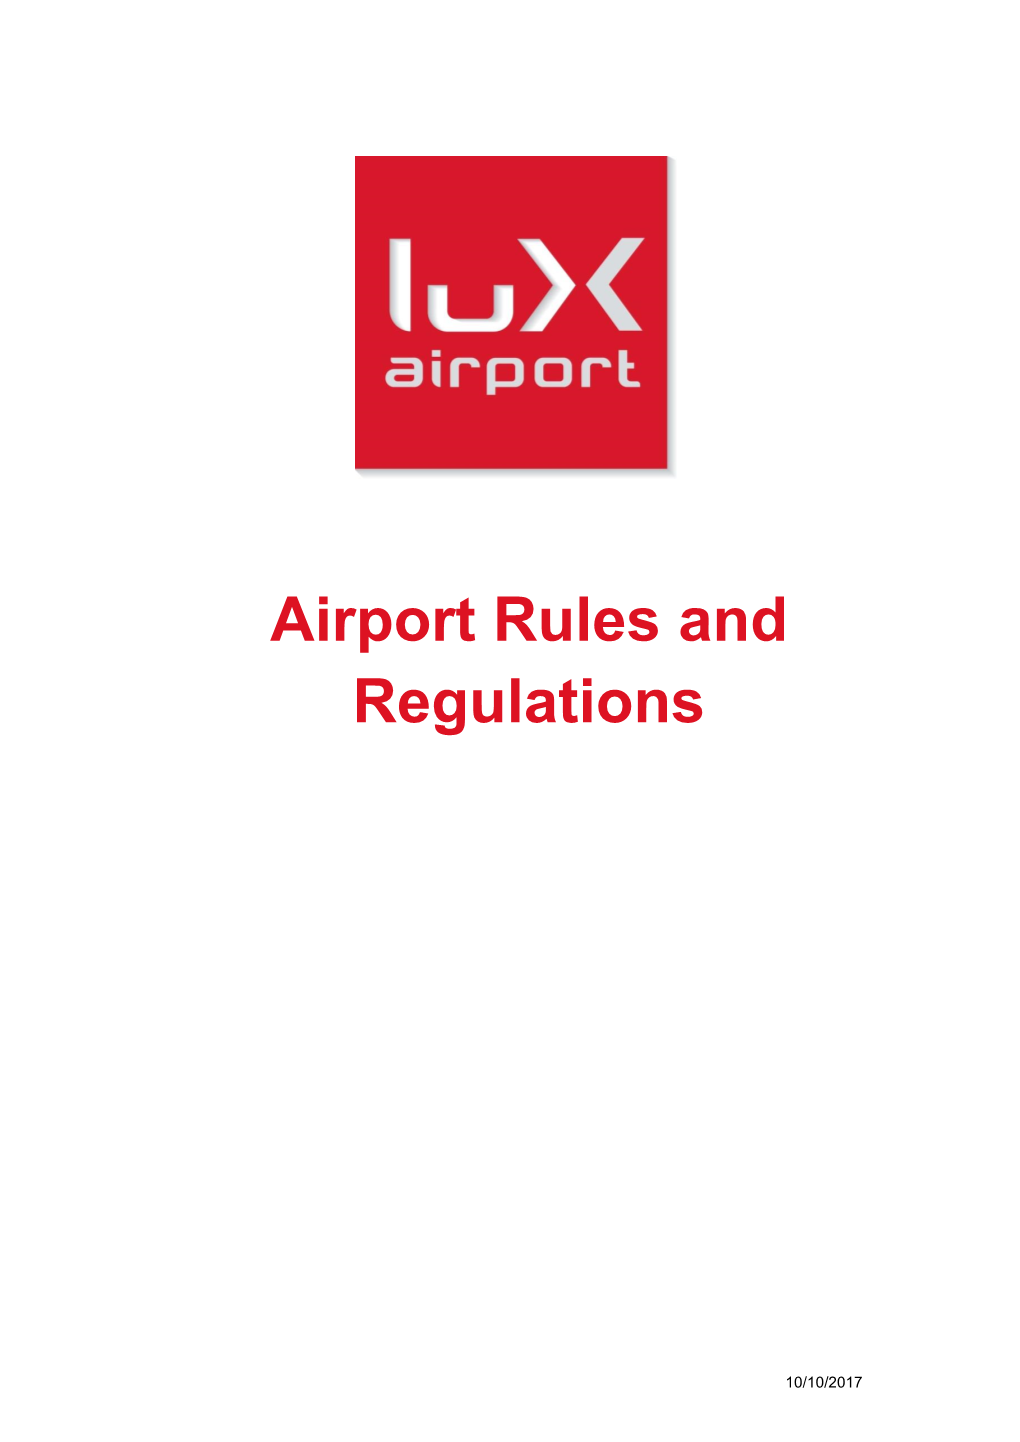 Airport Rules and Regulations